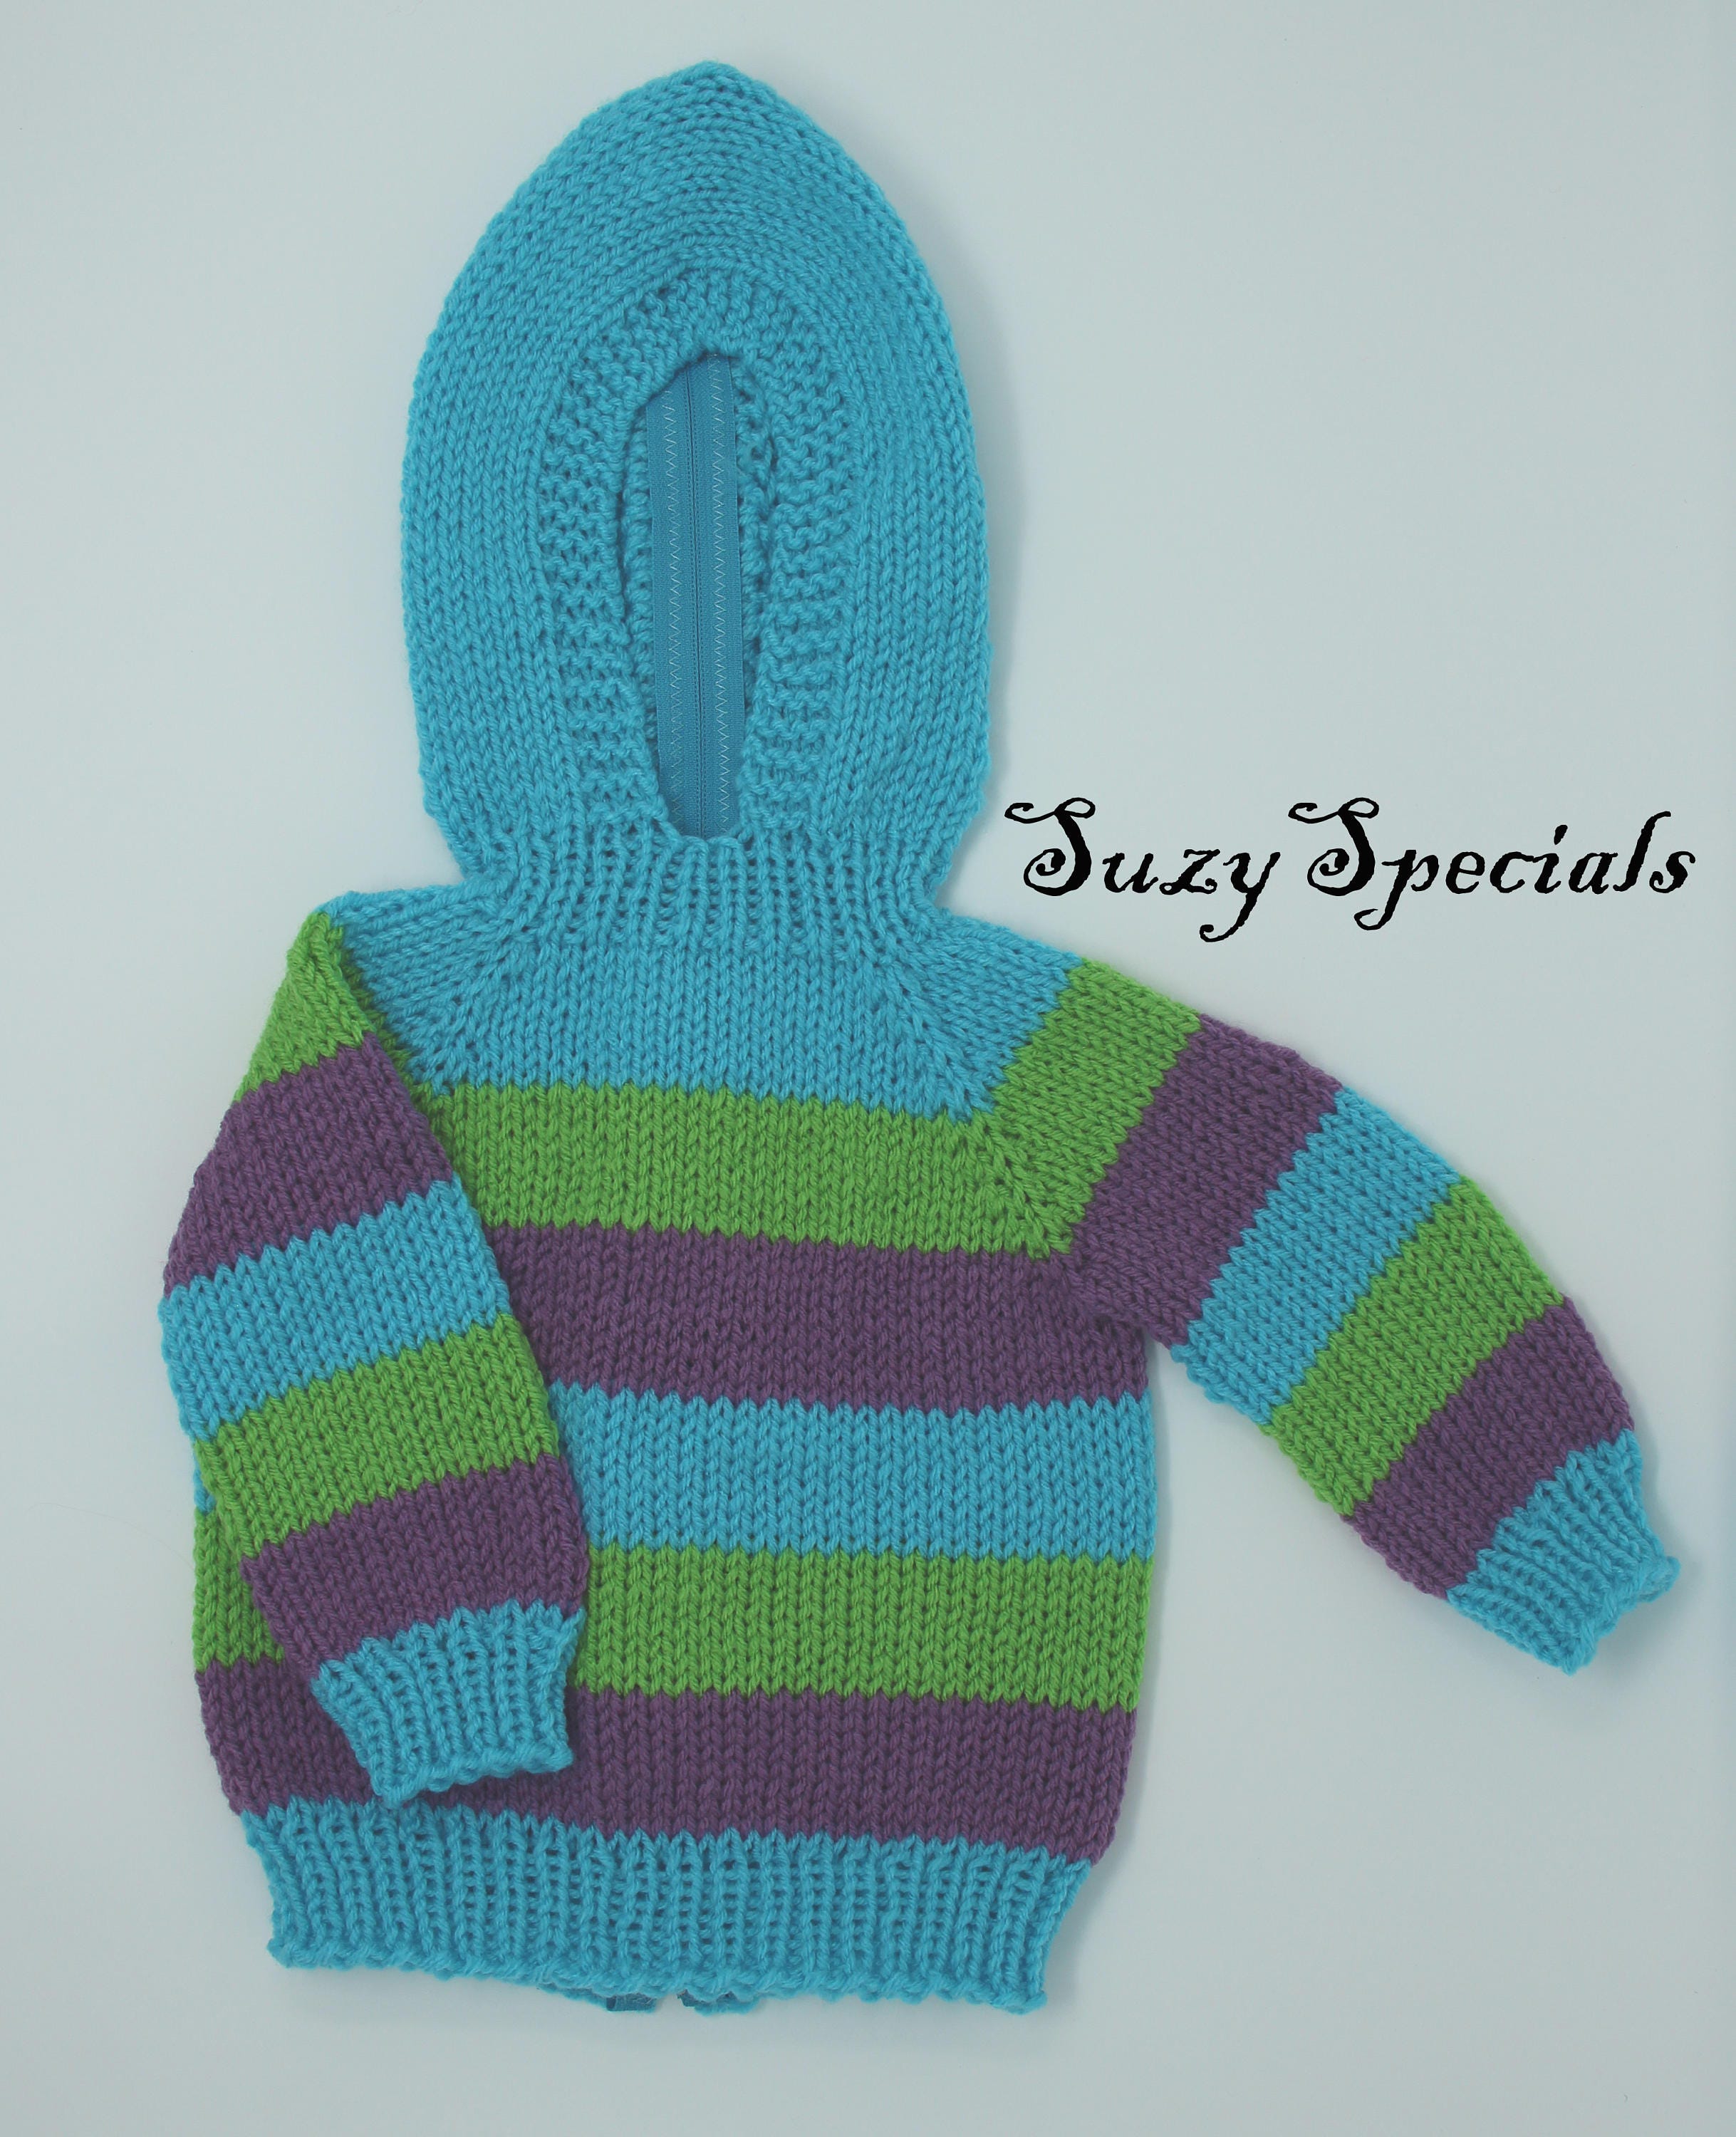 Hand Knitted Baby Sweater with Back Zipper in Blue, Green and ...